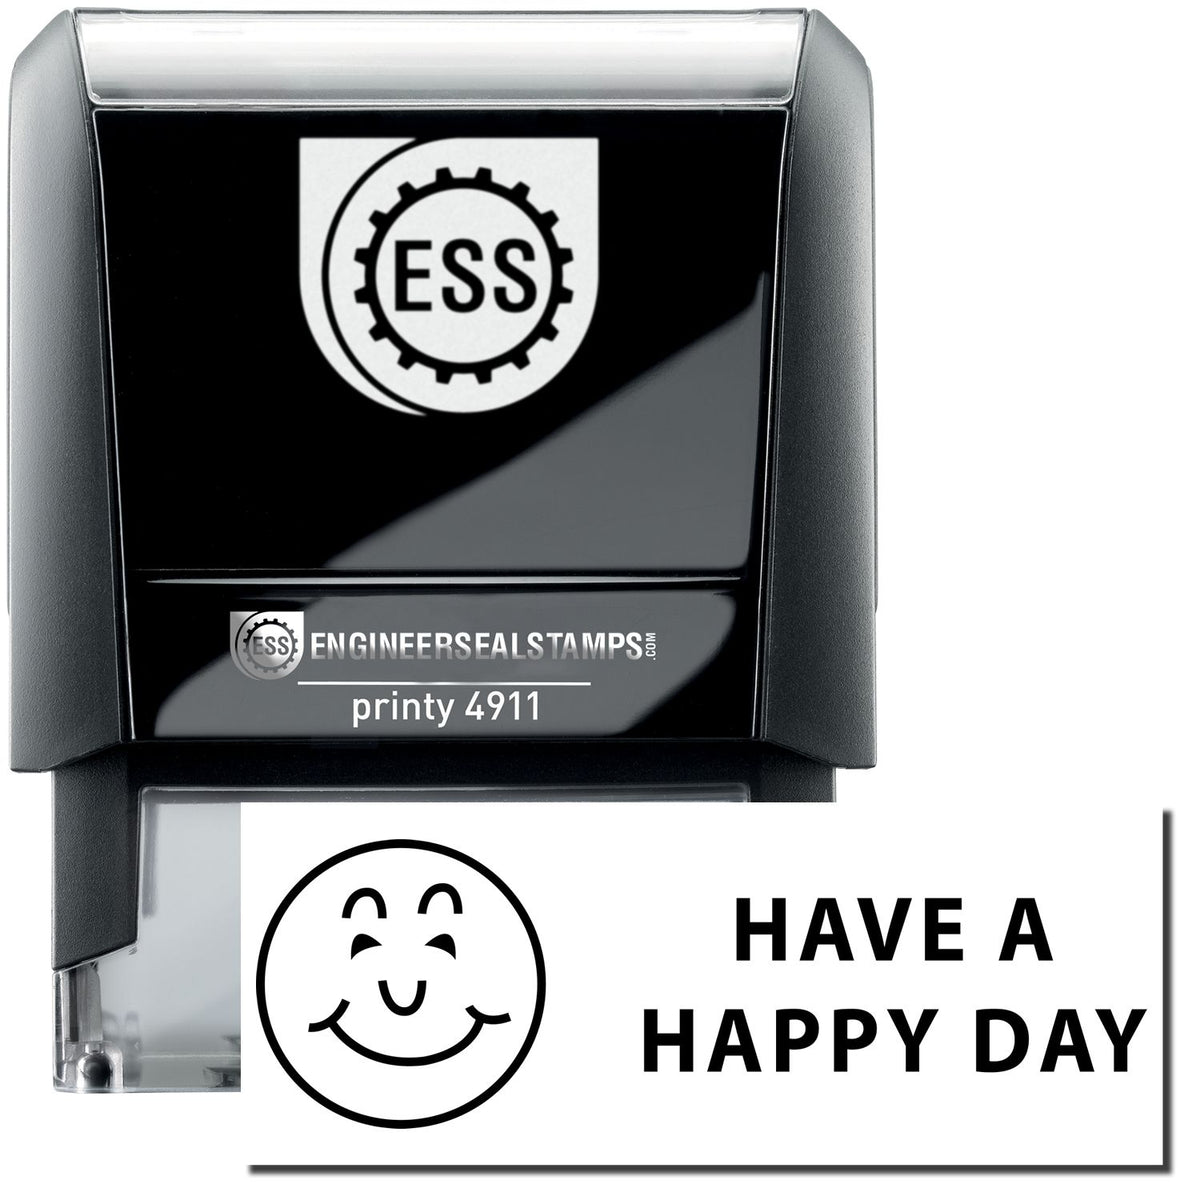 A self-inking stamp with a stamped image showing how the text &quot;HAVE A HAPPY DAY&quot; with an icon of a smiling face on the left is displayed after stamping.